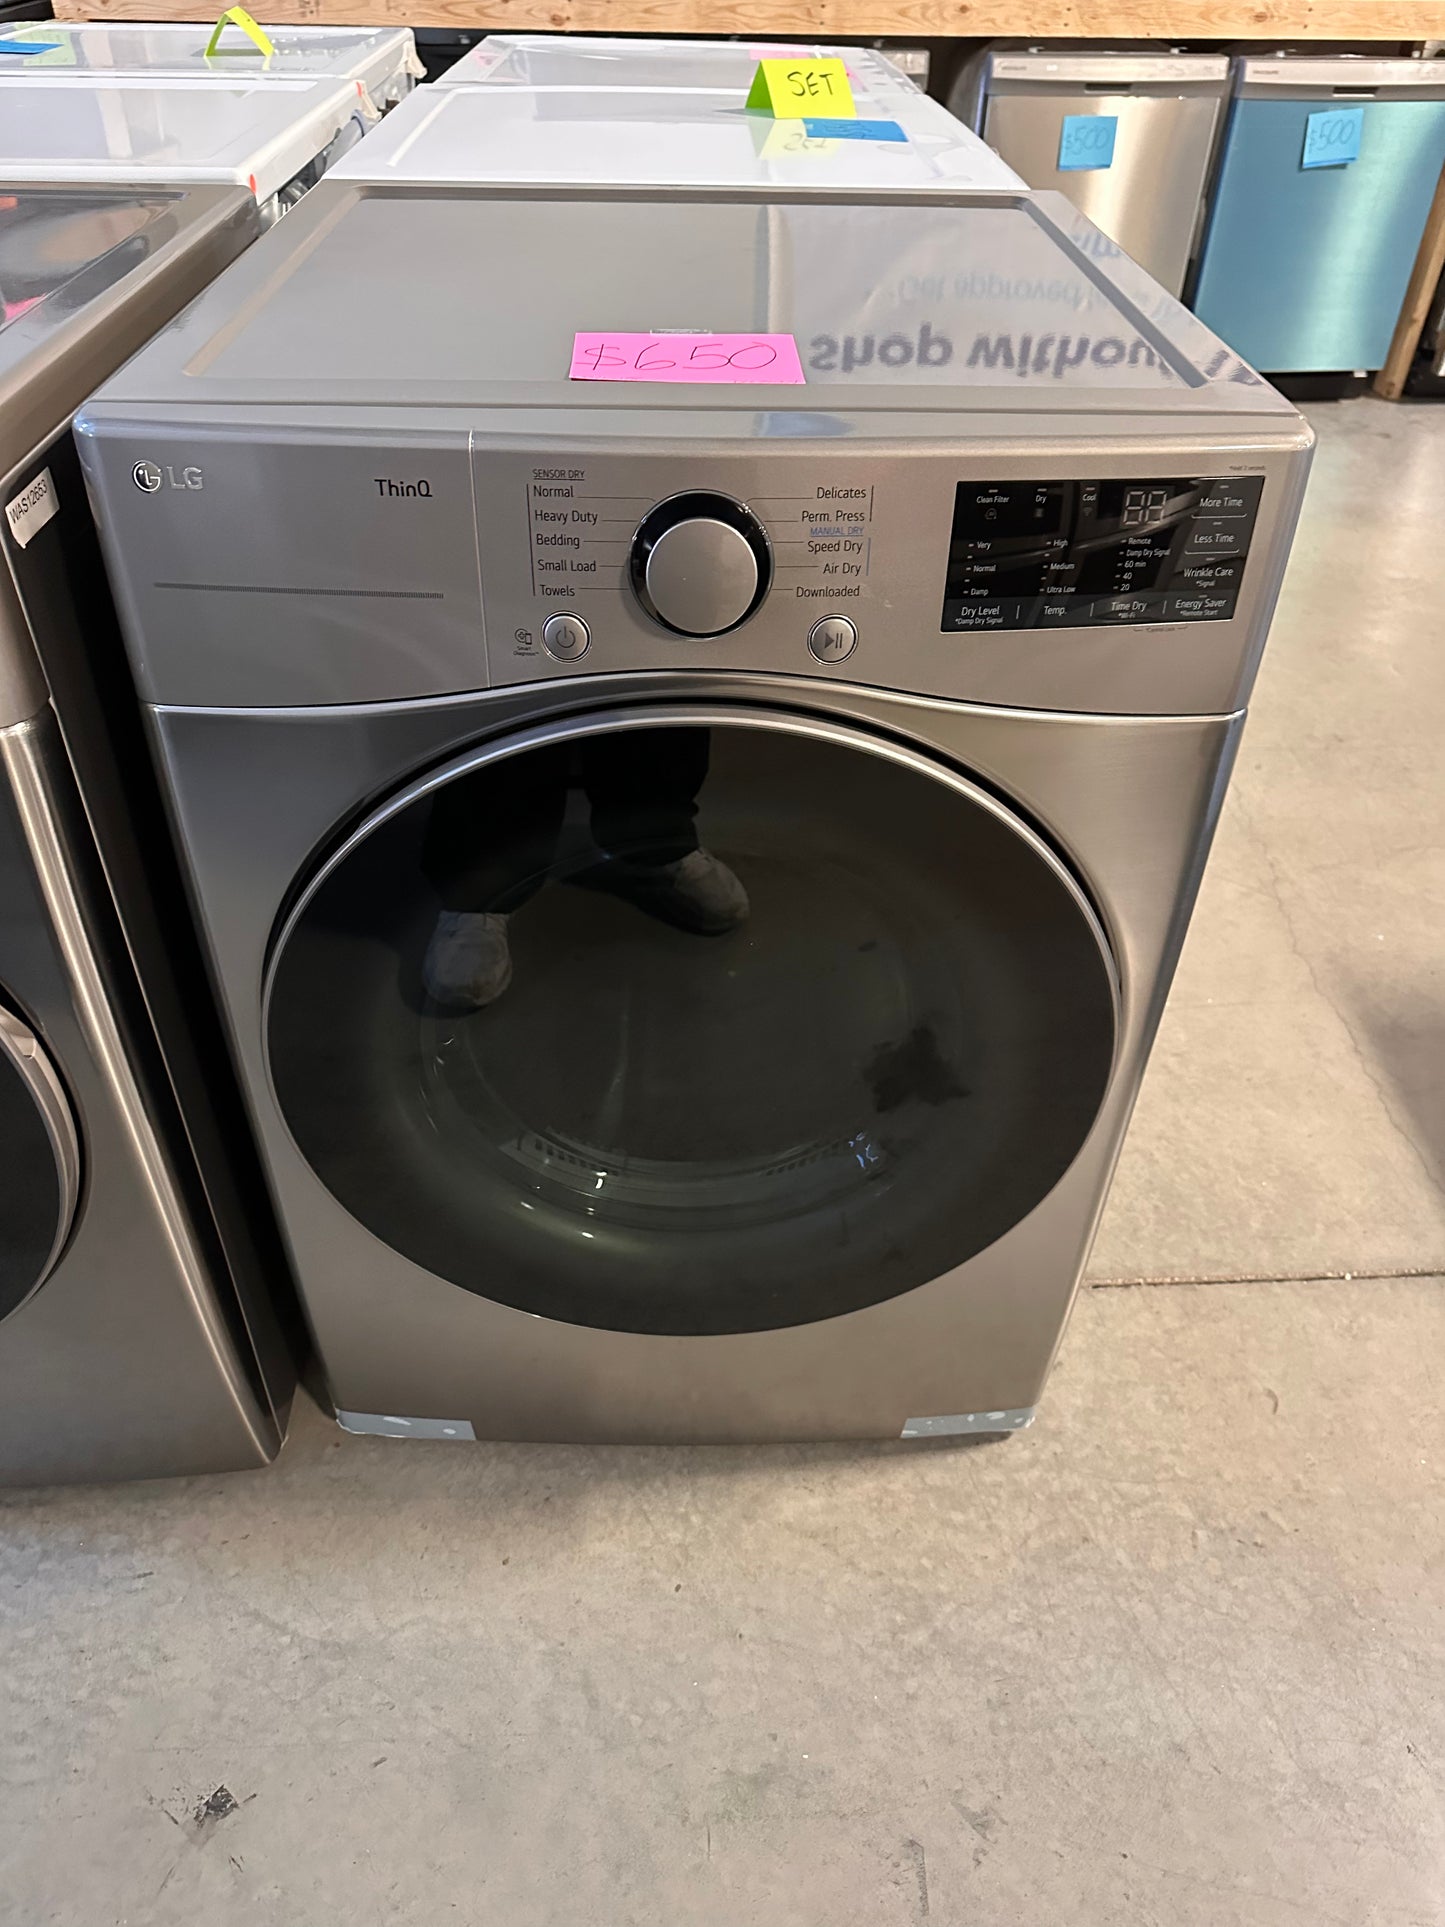 STACKABLE ELECTRIC DRYER - SMART LG DRYER - DRY12078